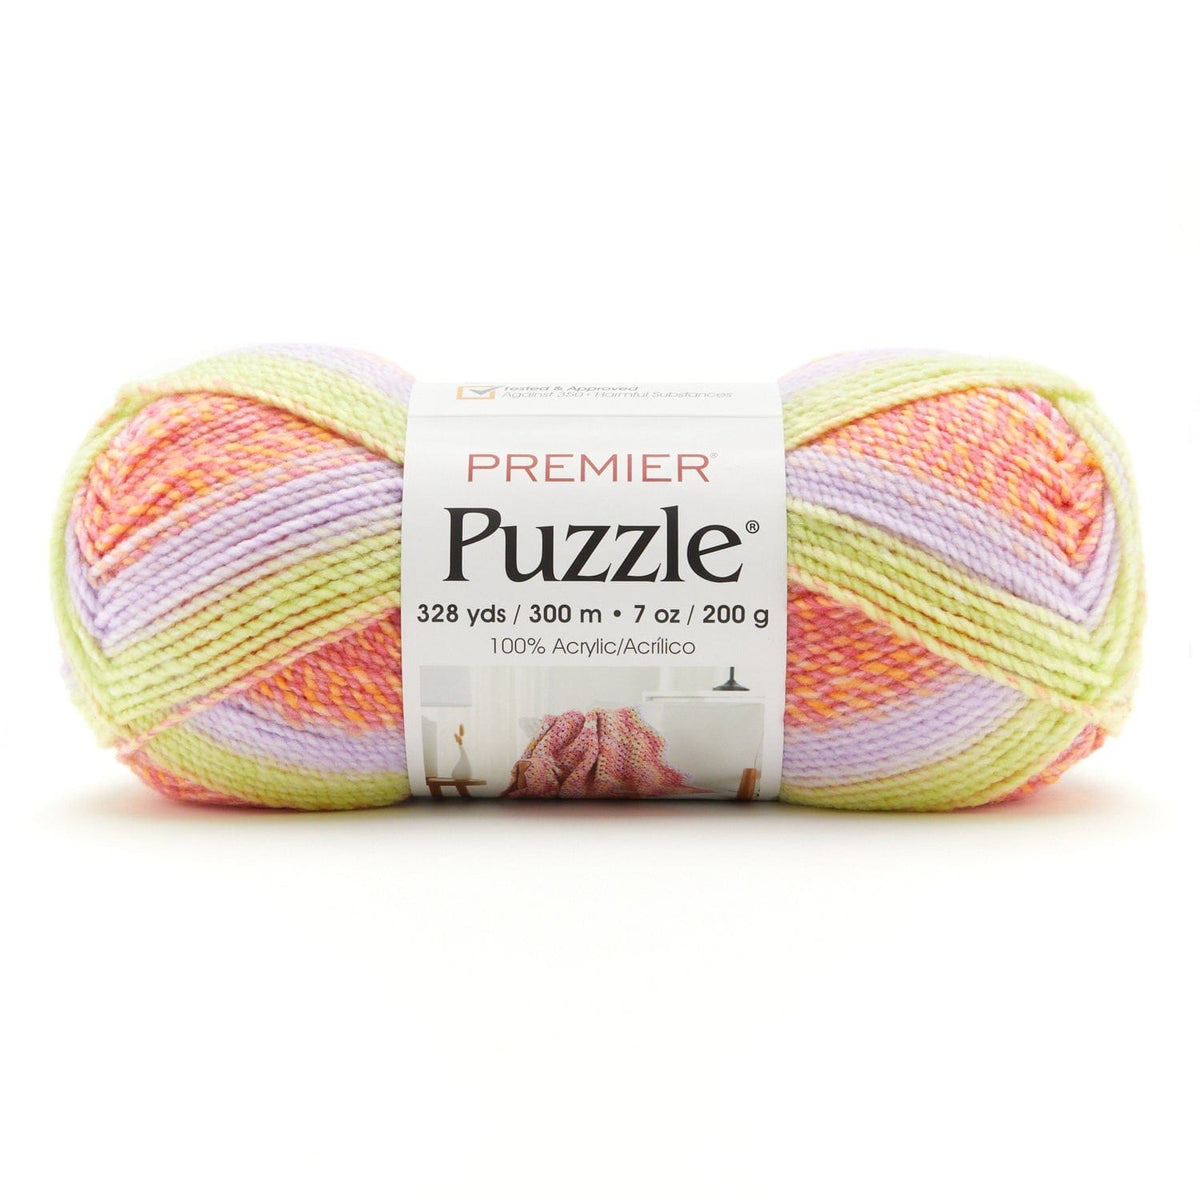 New Series Yarn Swatches Episode # 4 Premier Puzzle Yarn